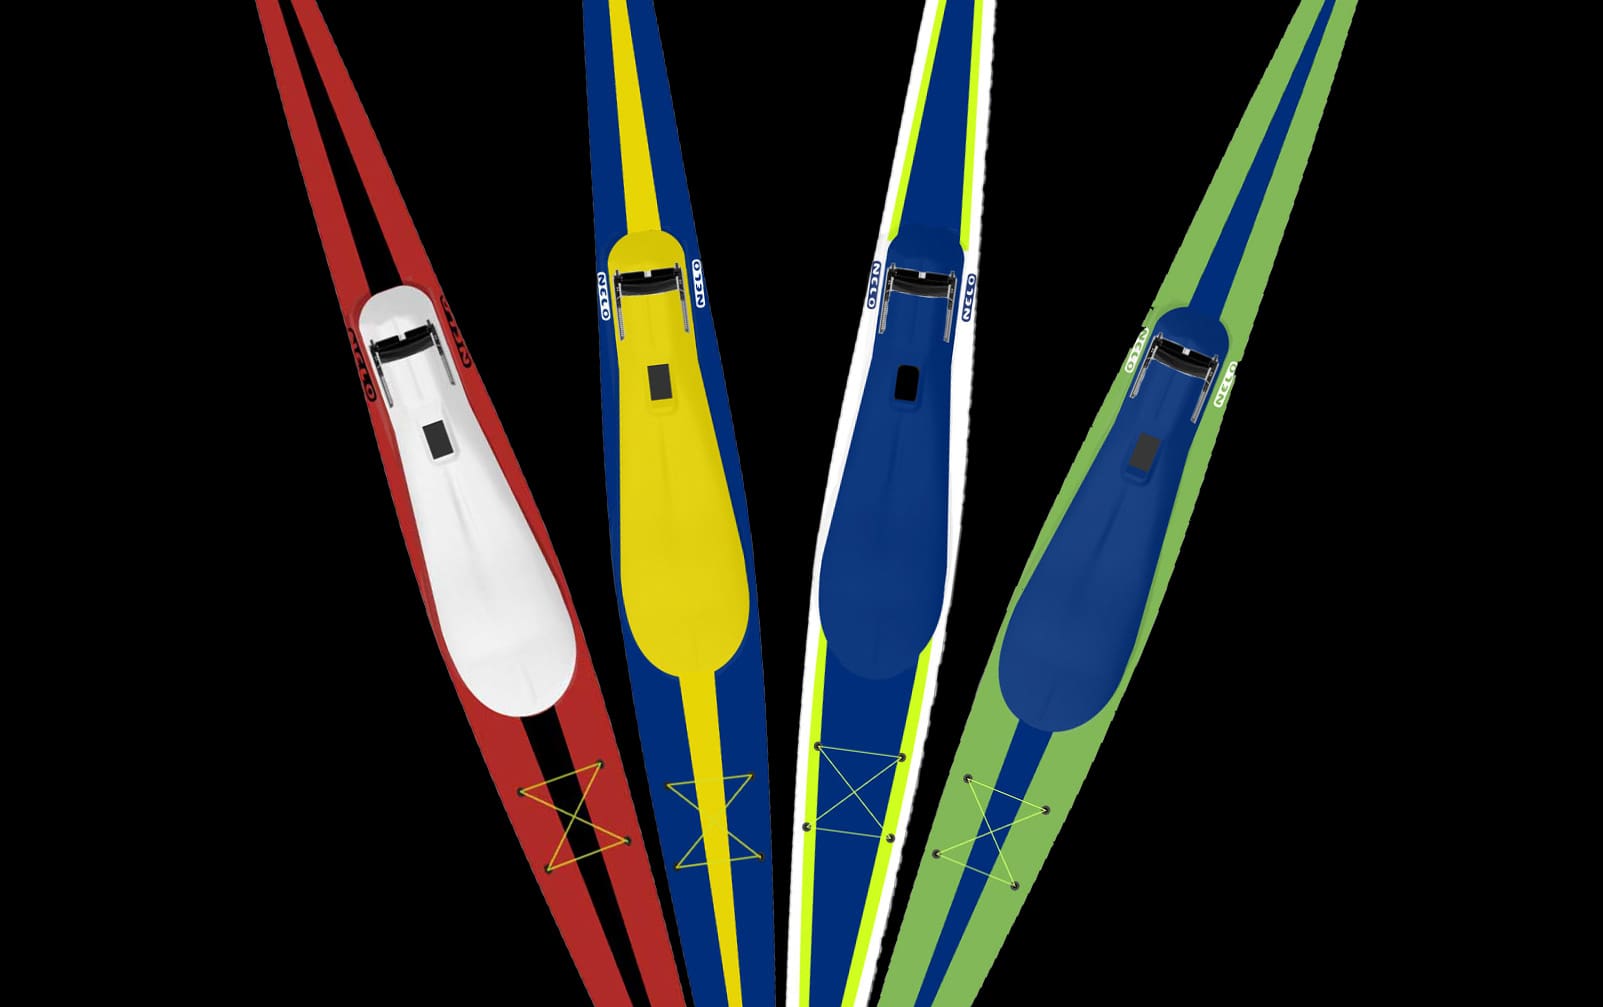 Nelo Surfskis In Stock and Buy Now!